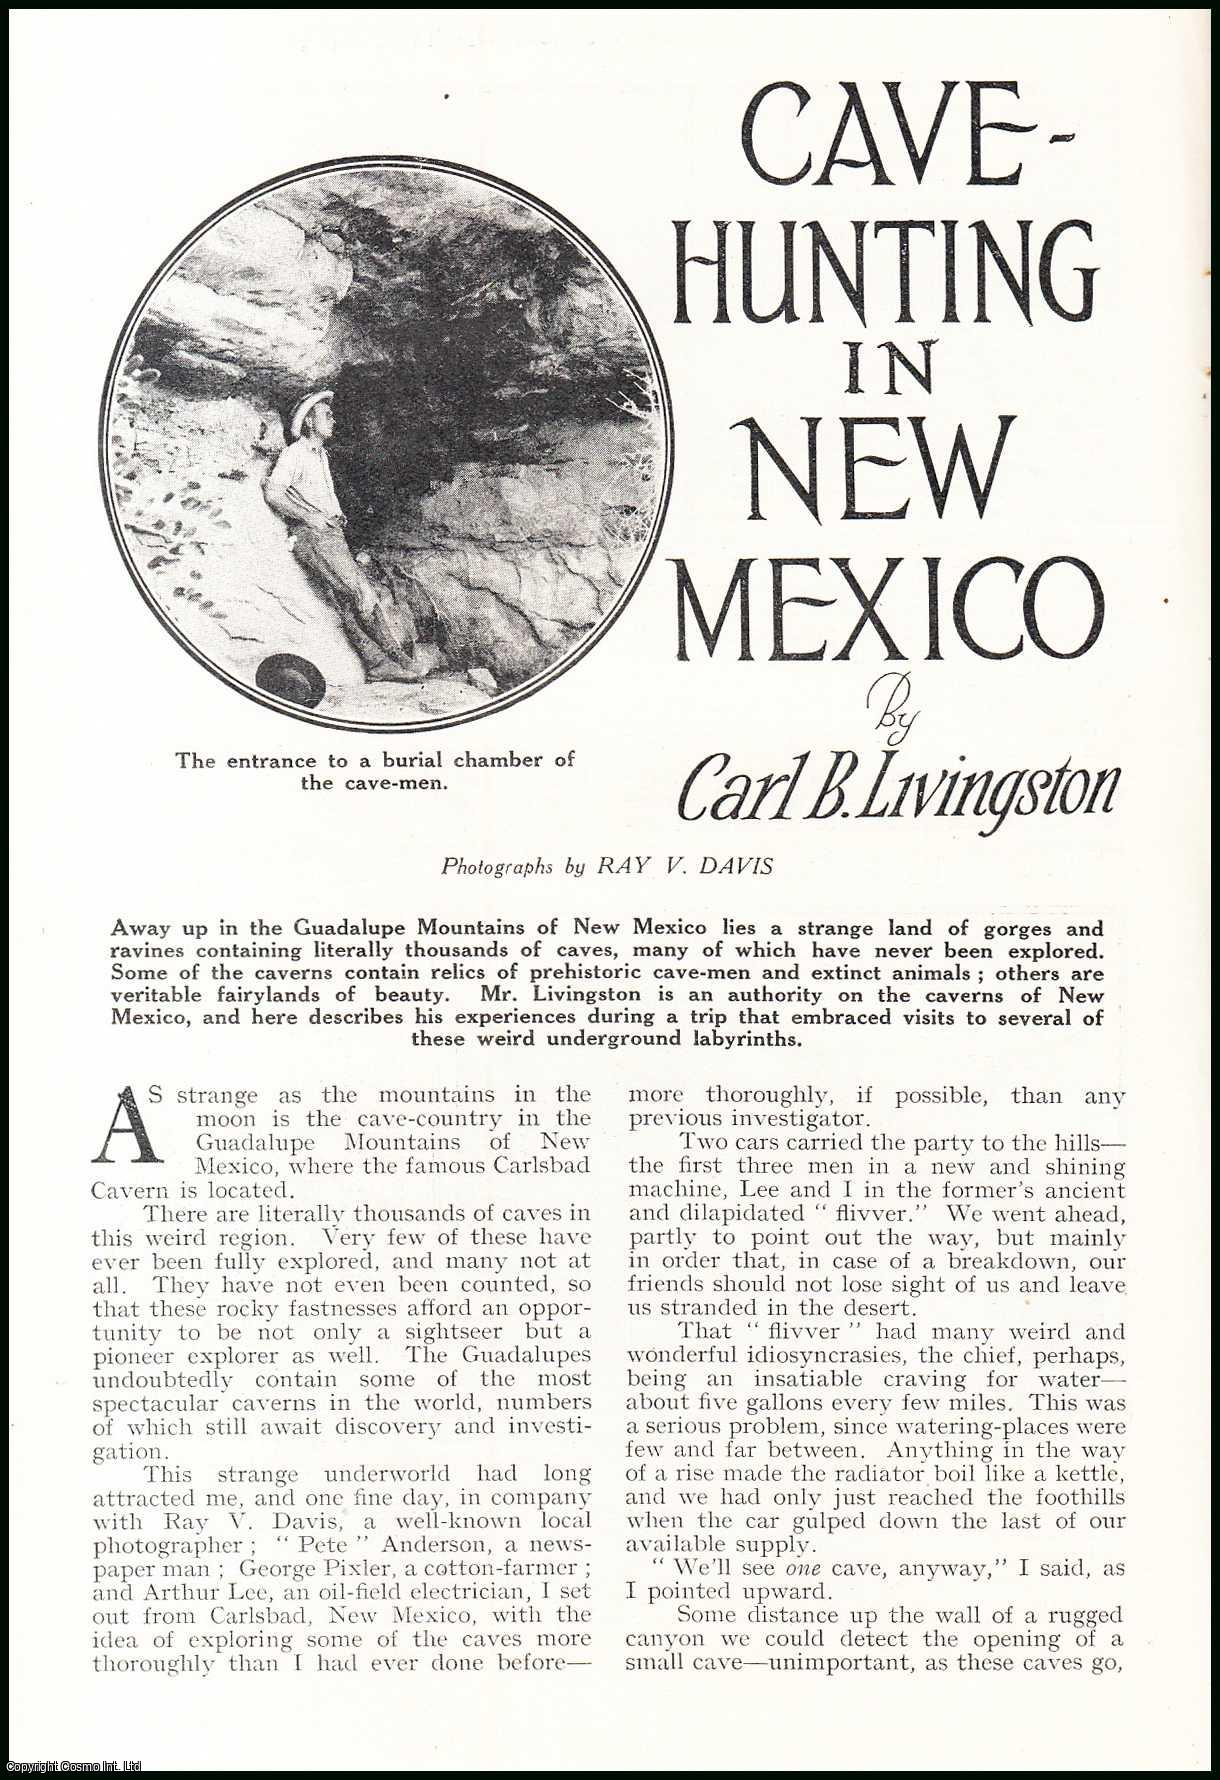 Carl B. Livingston. Photographs by Ray V. Davis. - Cave-Hunting in New Mexico. An uncommon original article from the Wide World Magazine, 1926.